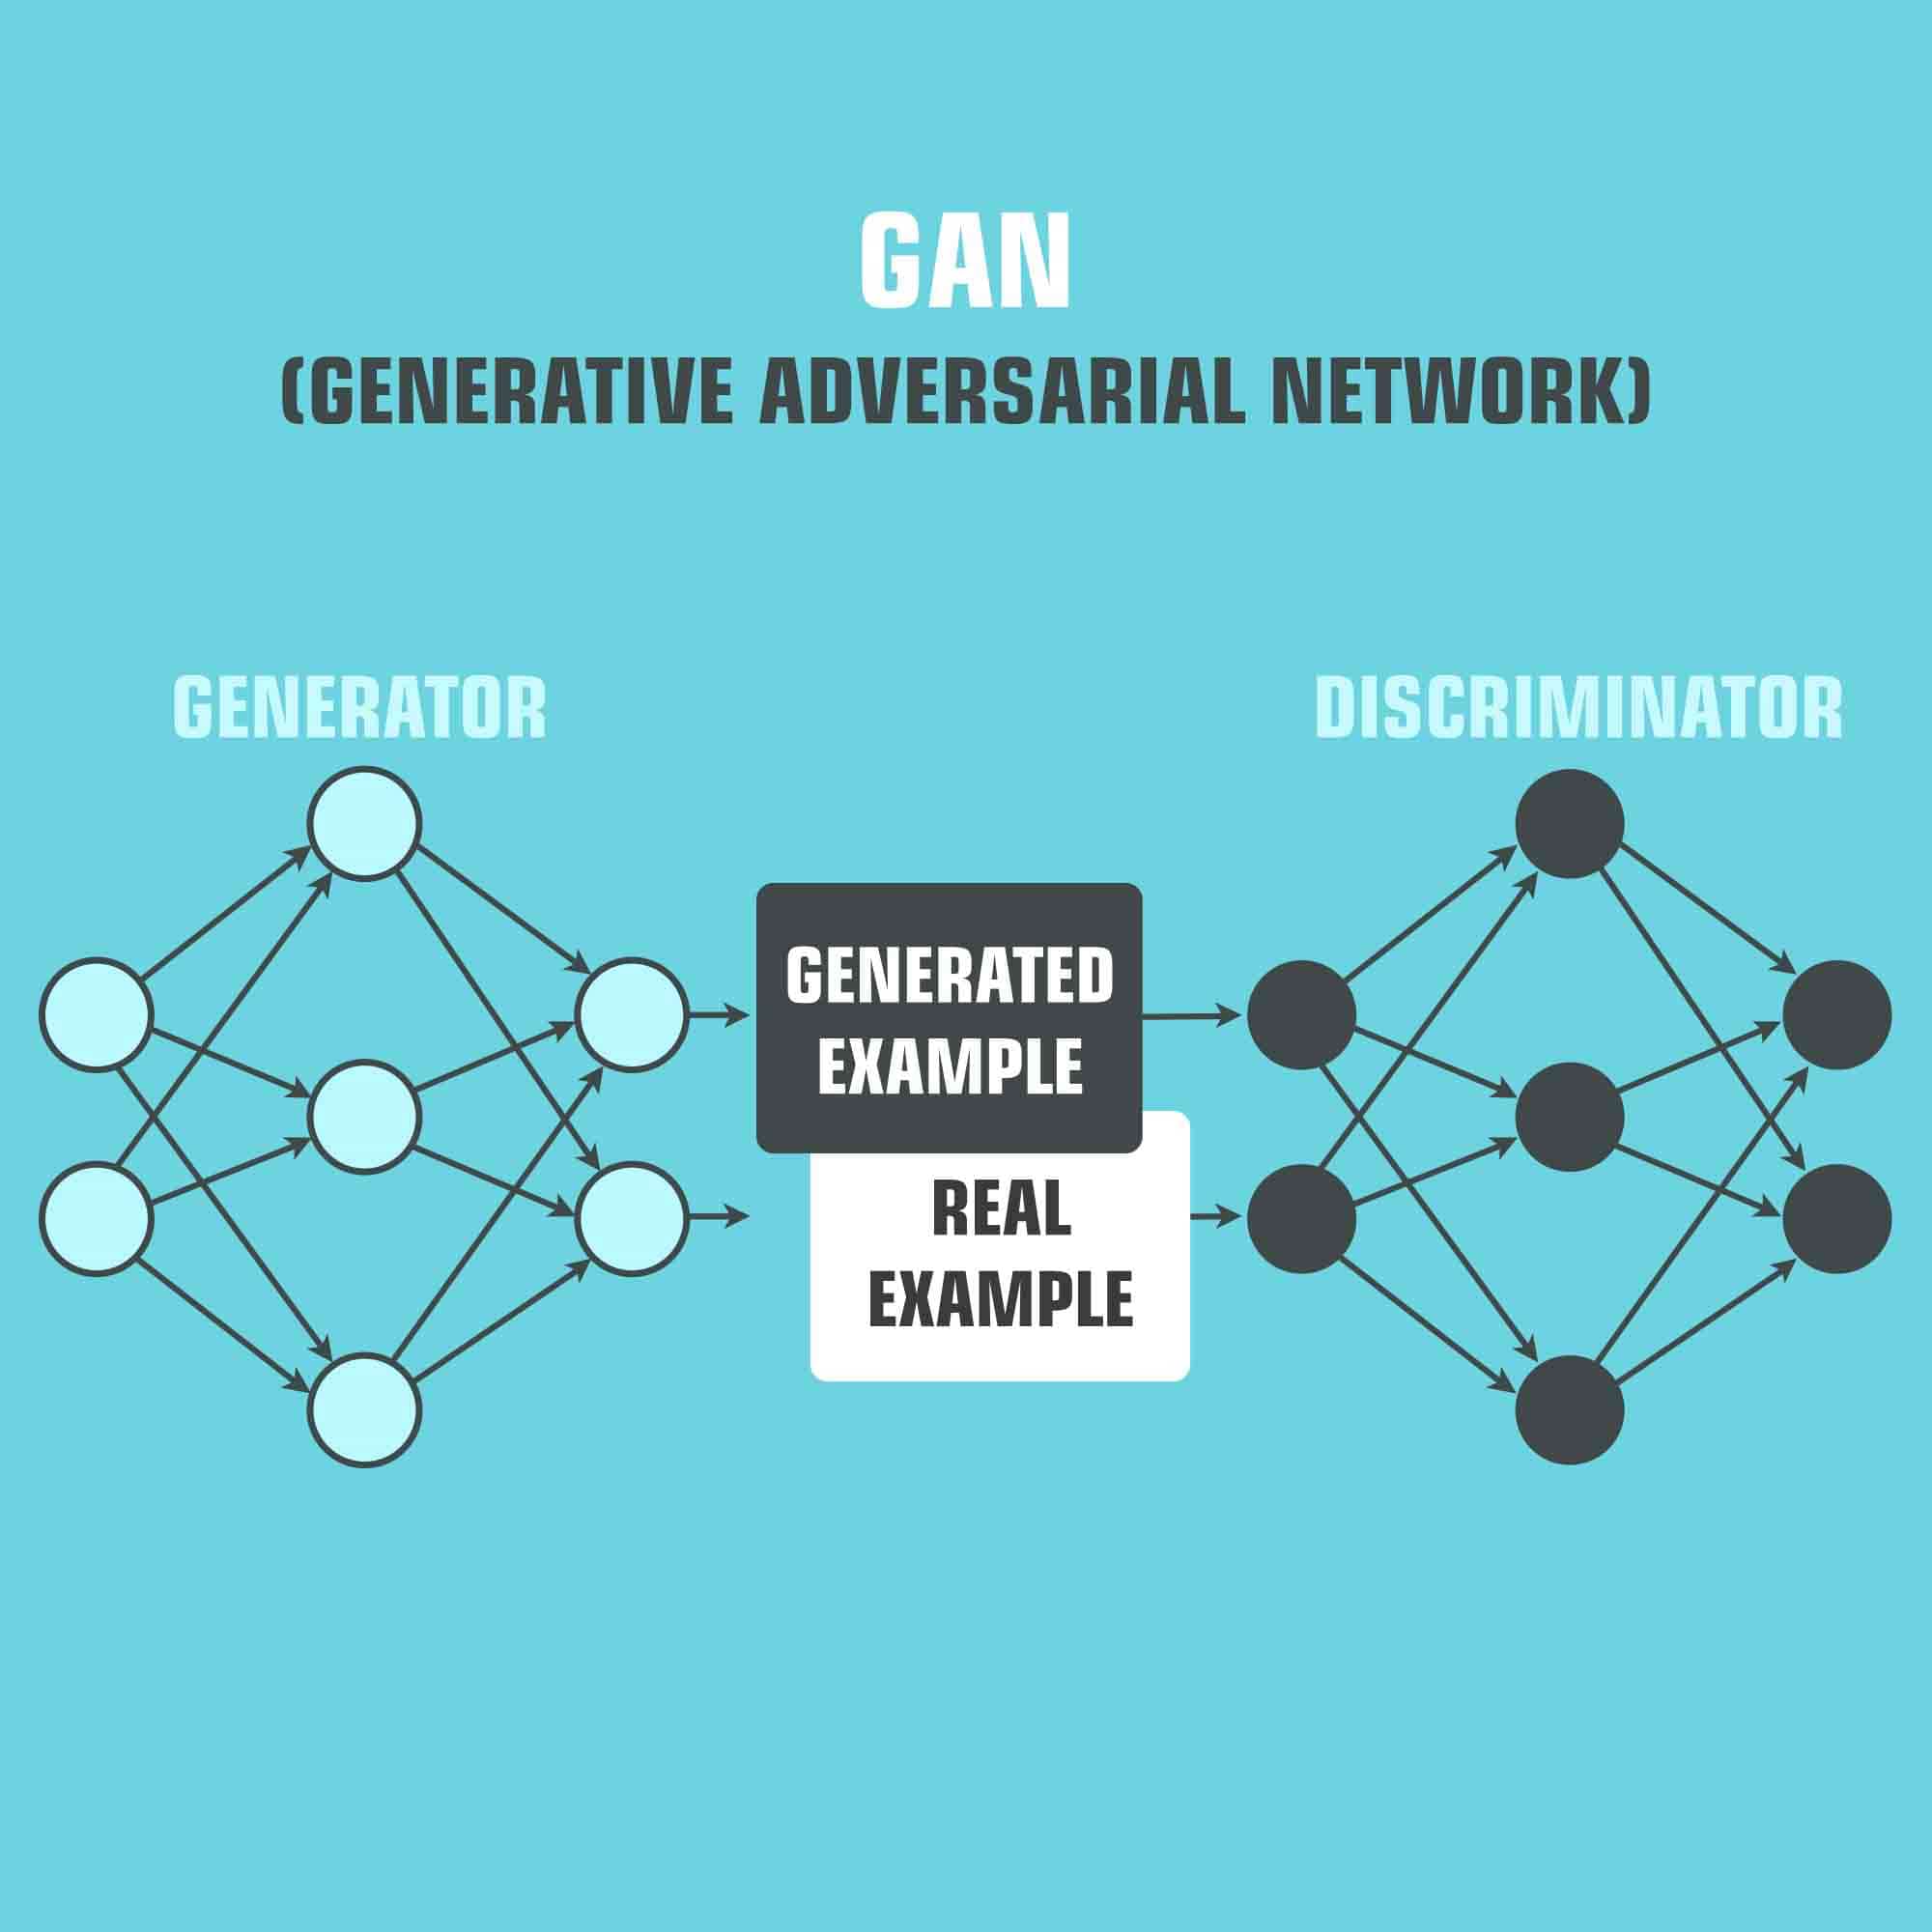 “Generative Adversarial Networks” November 2021 — summary from PubMed and Crossref main image